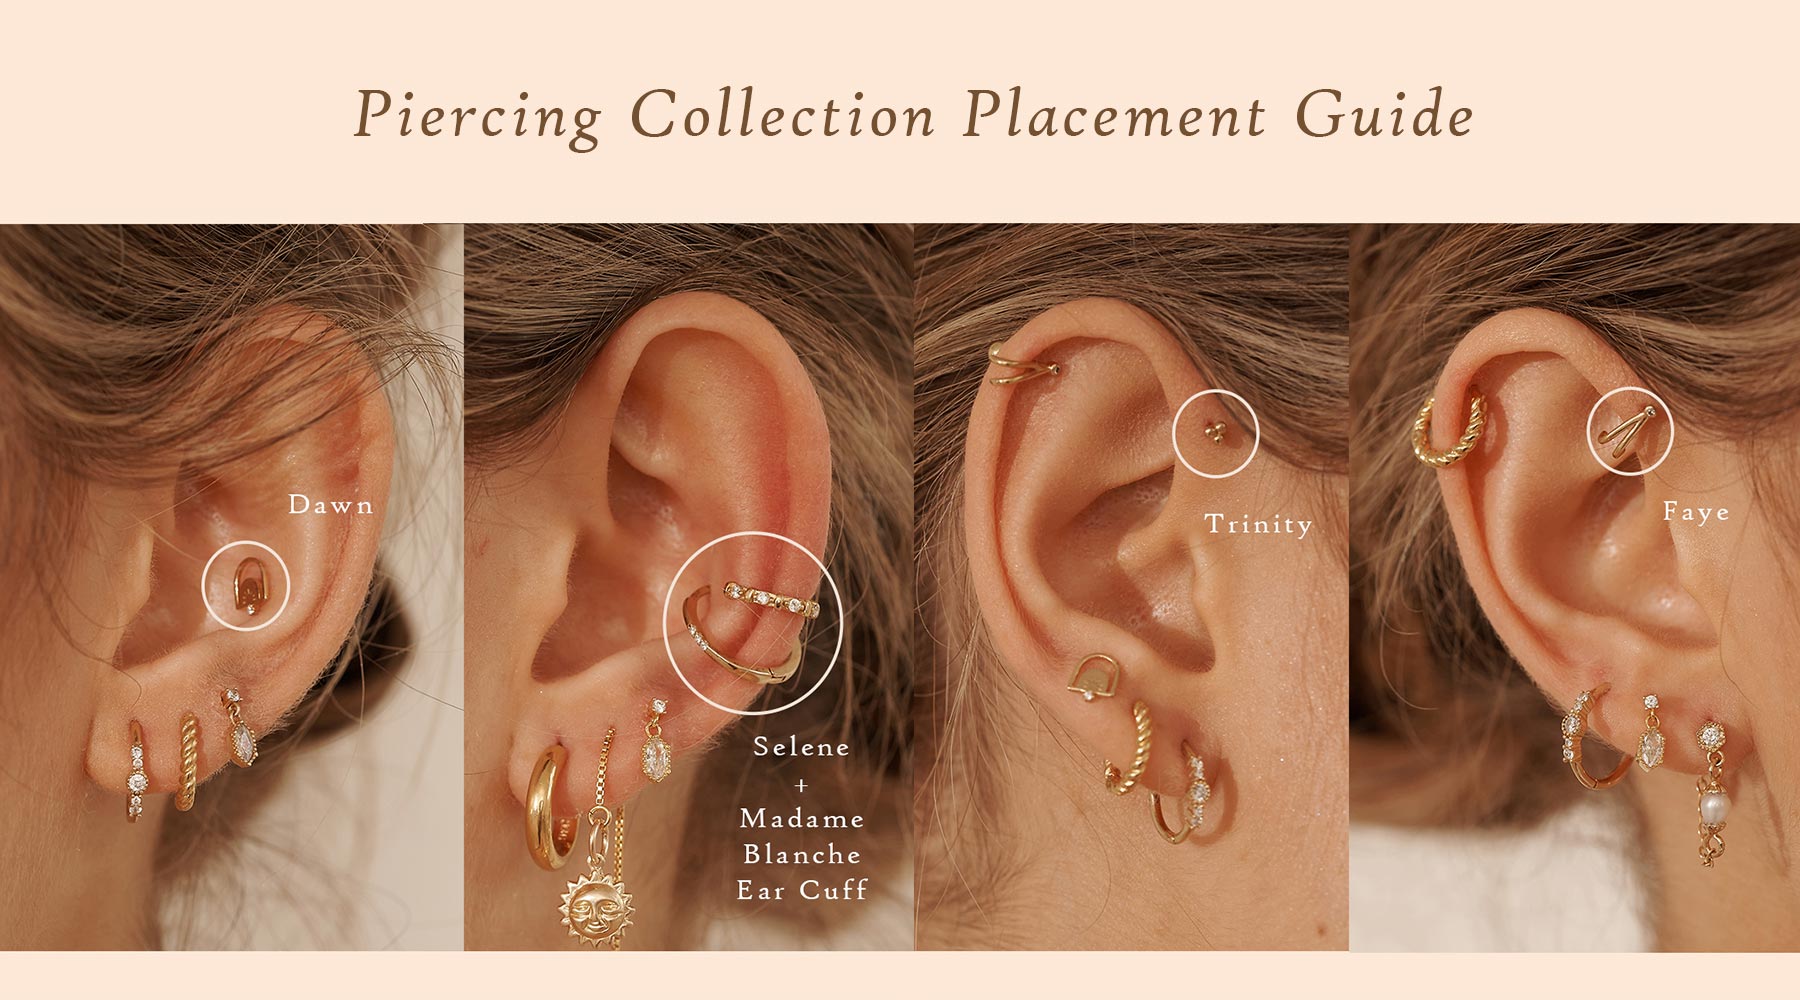 Piercings Collection Placement Guide